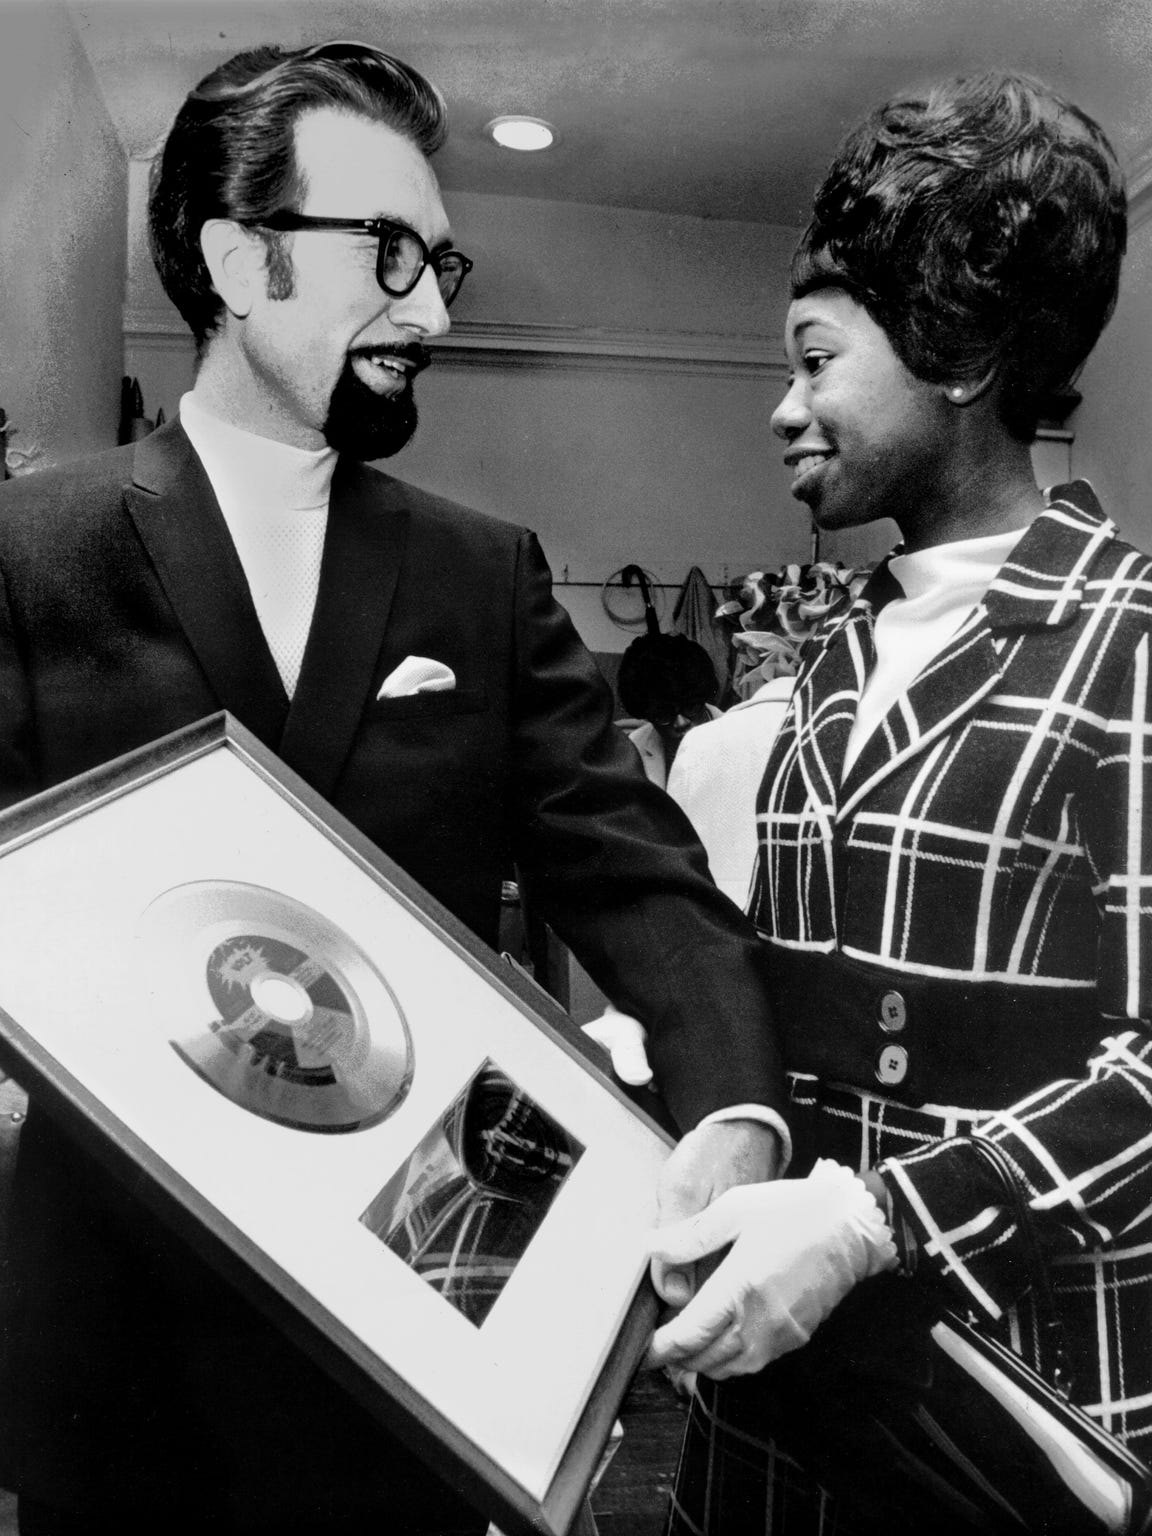 Stax Records president Jim Stewart presents Zelma Redding, wife of Otis Redding, with a gold record for "Dock Of The Bay", which was recorded at Stax four days before the late "King of the Memphis Sound" died in a Wisconsin plane crash.